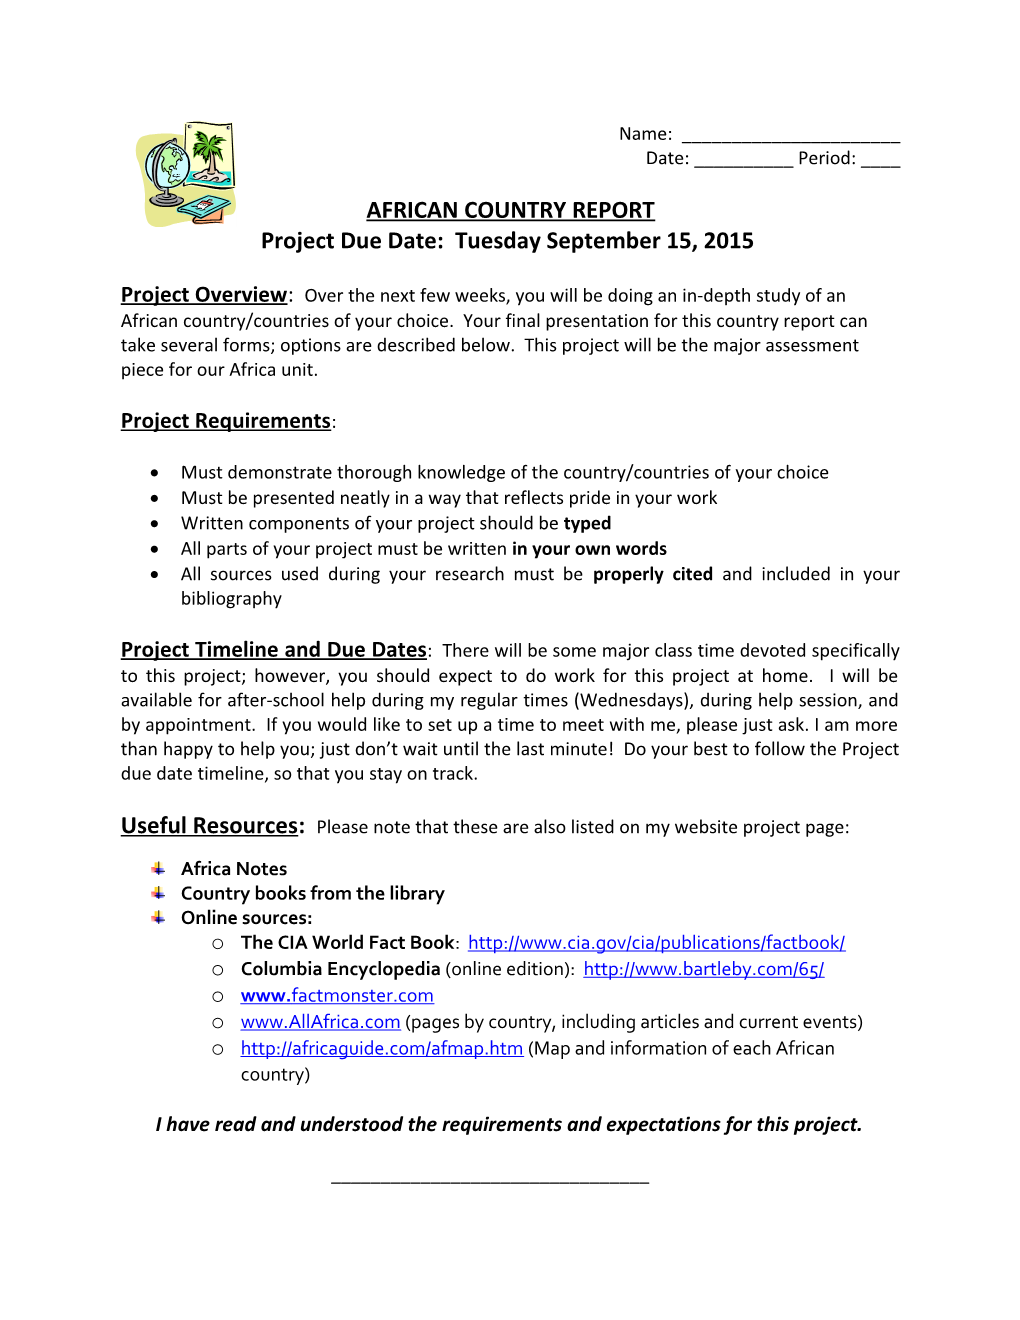 African Country Report